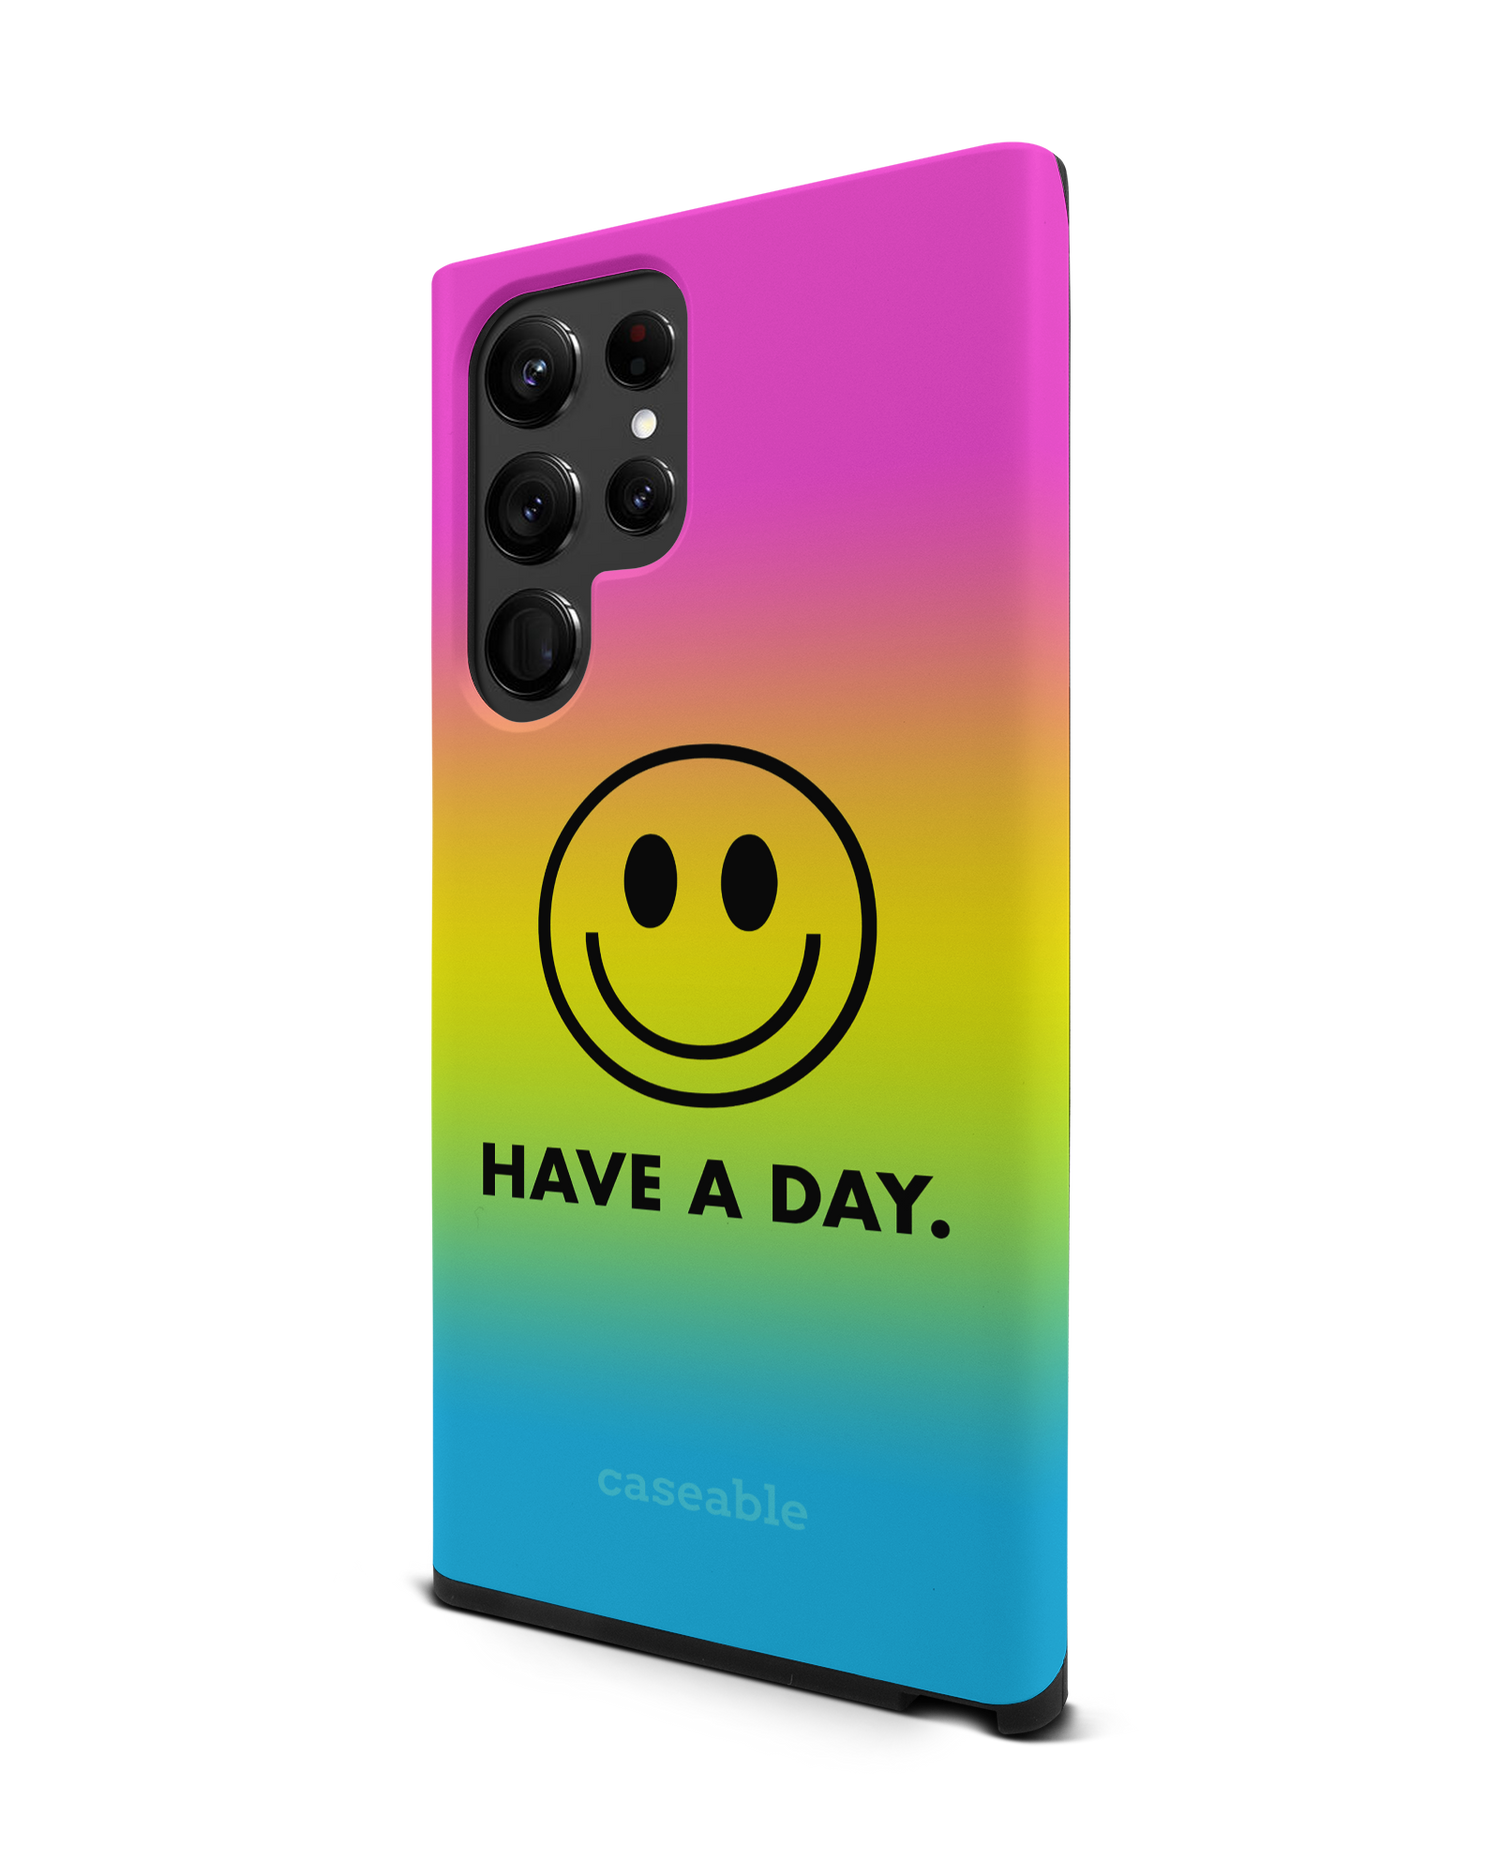 Have A Day Premium Phone Case Samsung Galaxy S22 Ultra 5G: View from the right side